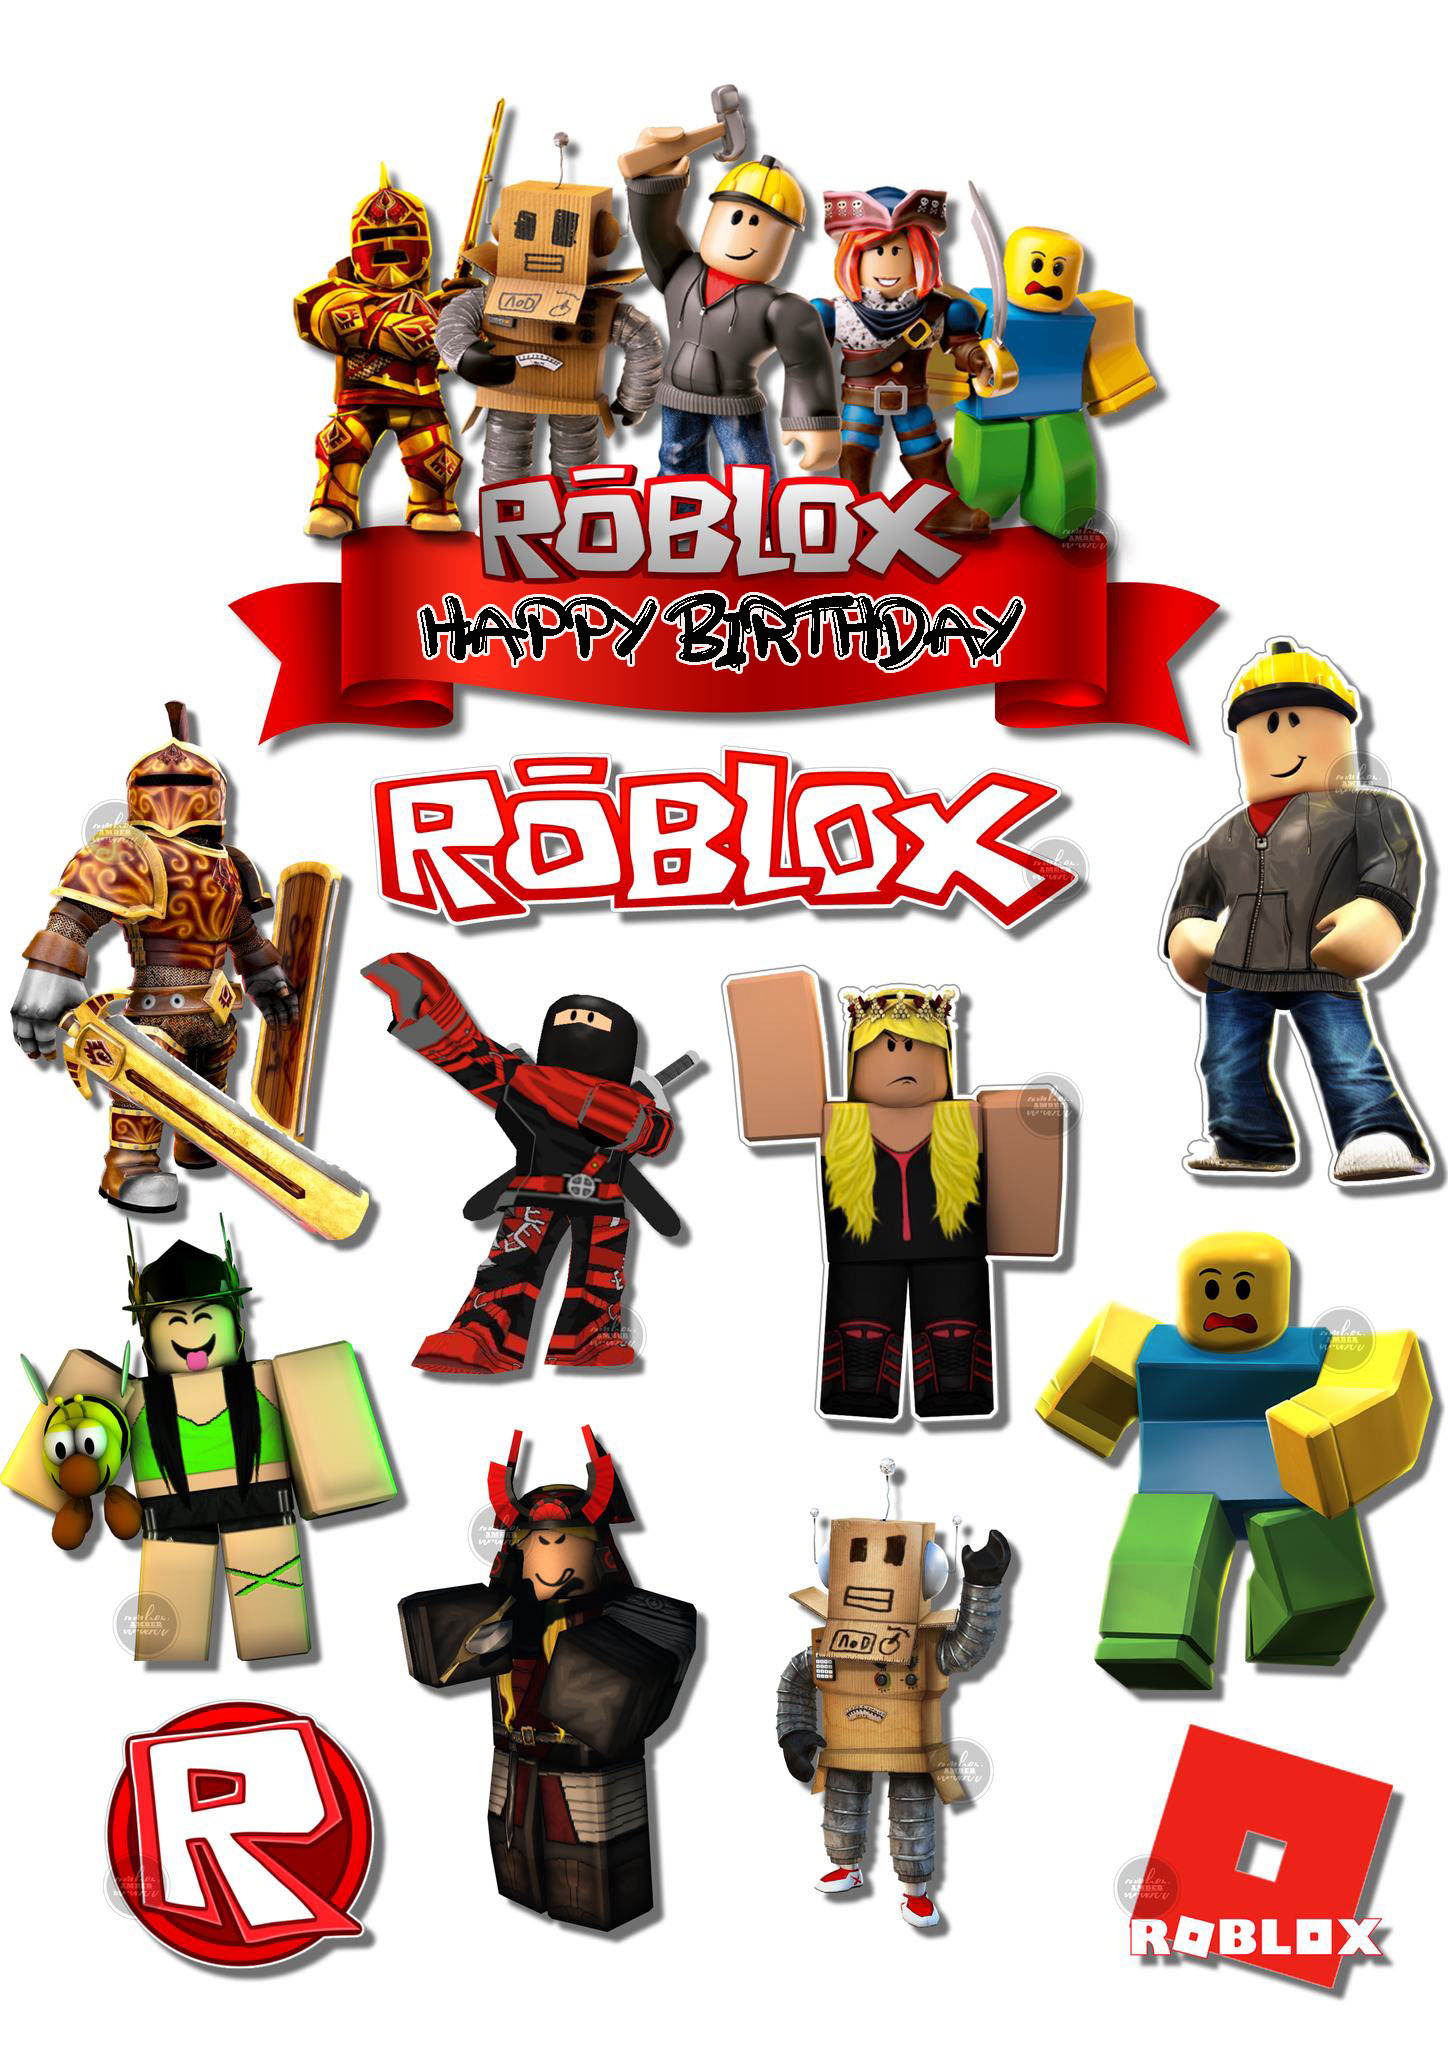 Roblox Cake Toppers | Printable & Personalized – PimpYourWorld